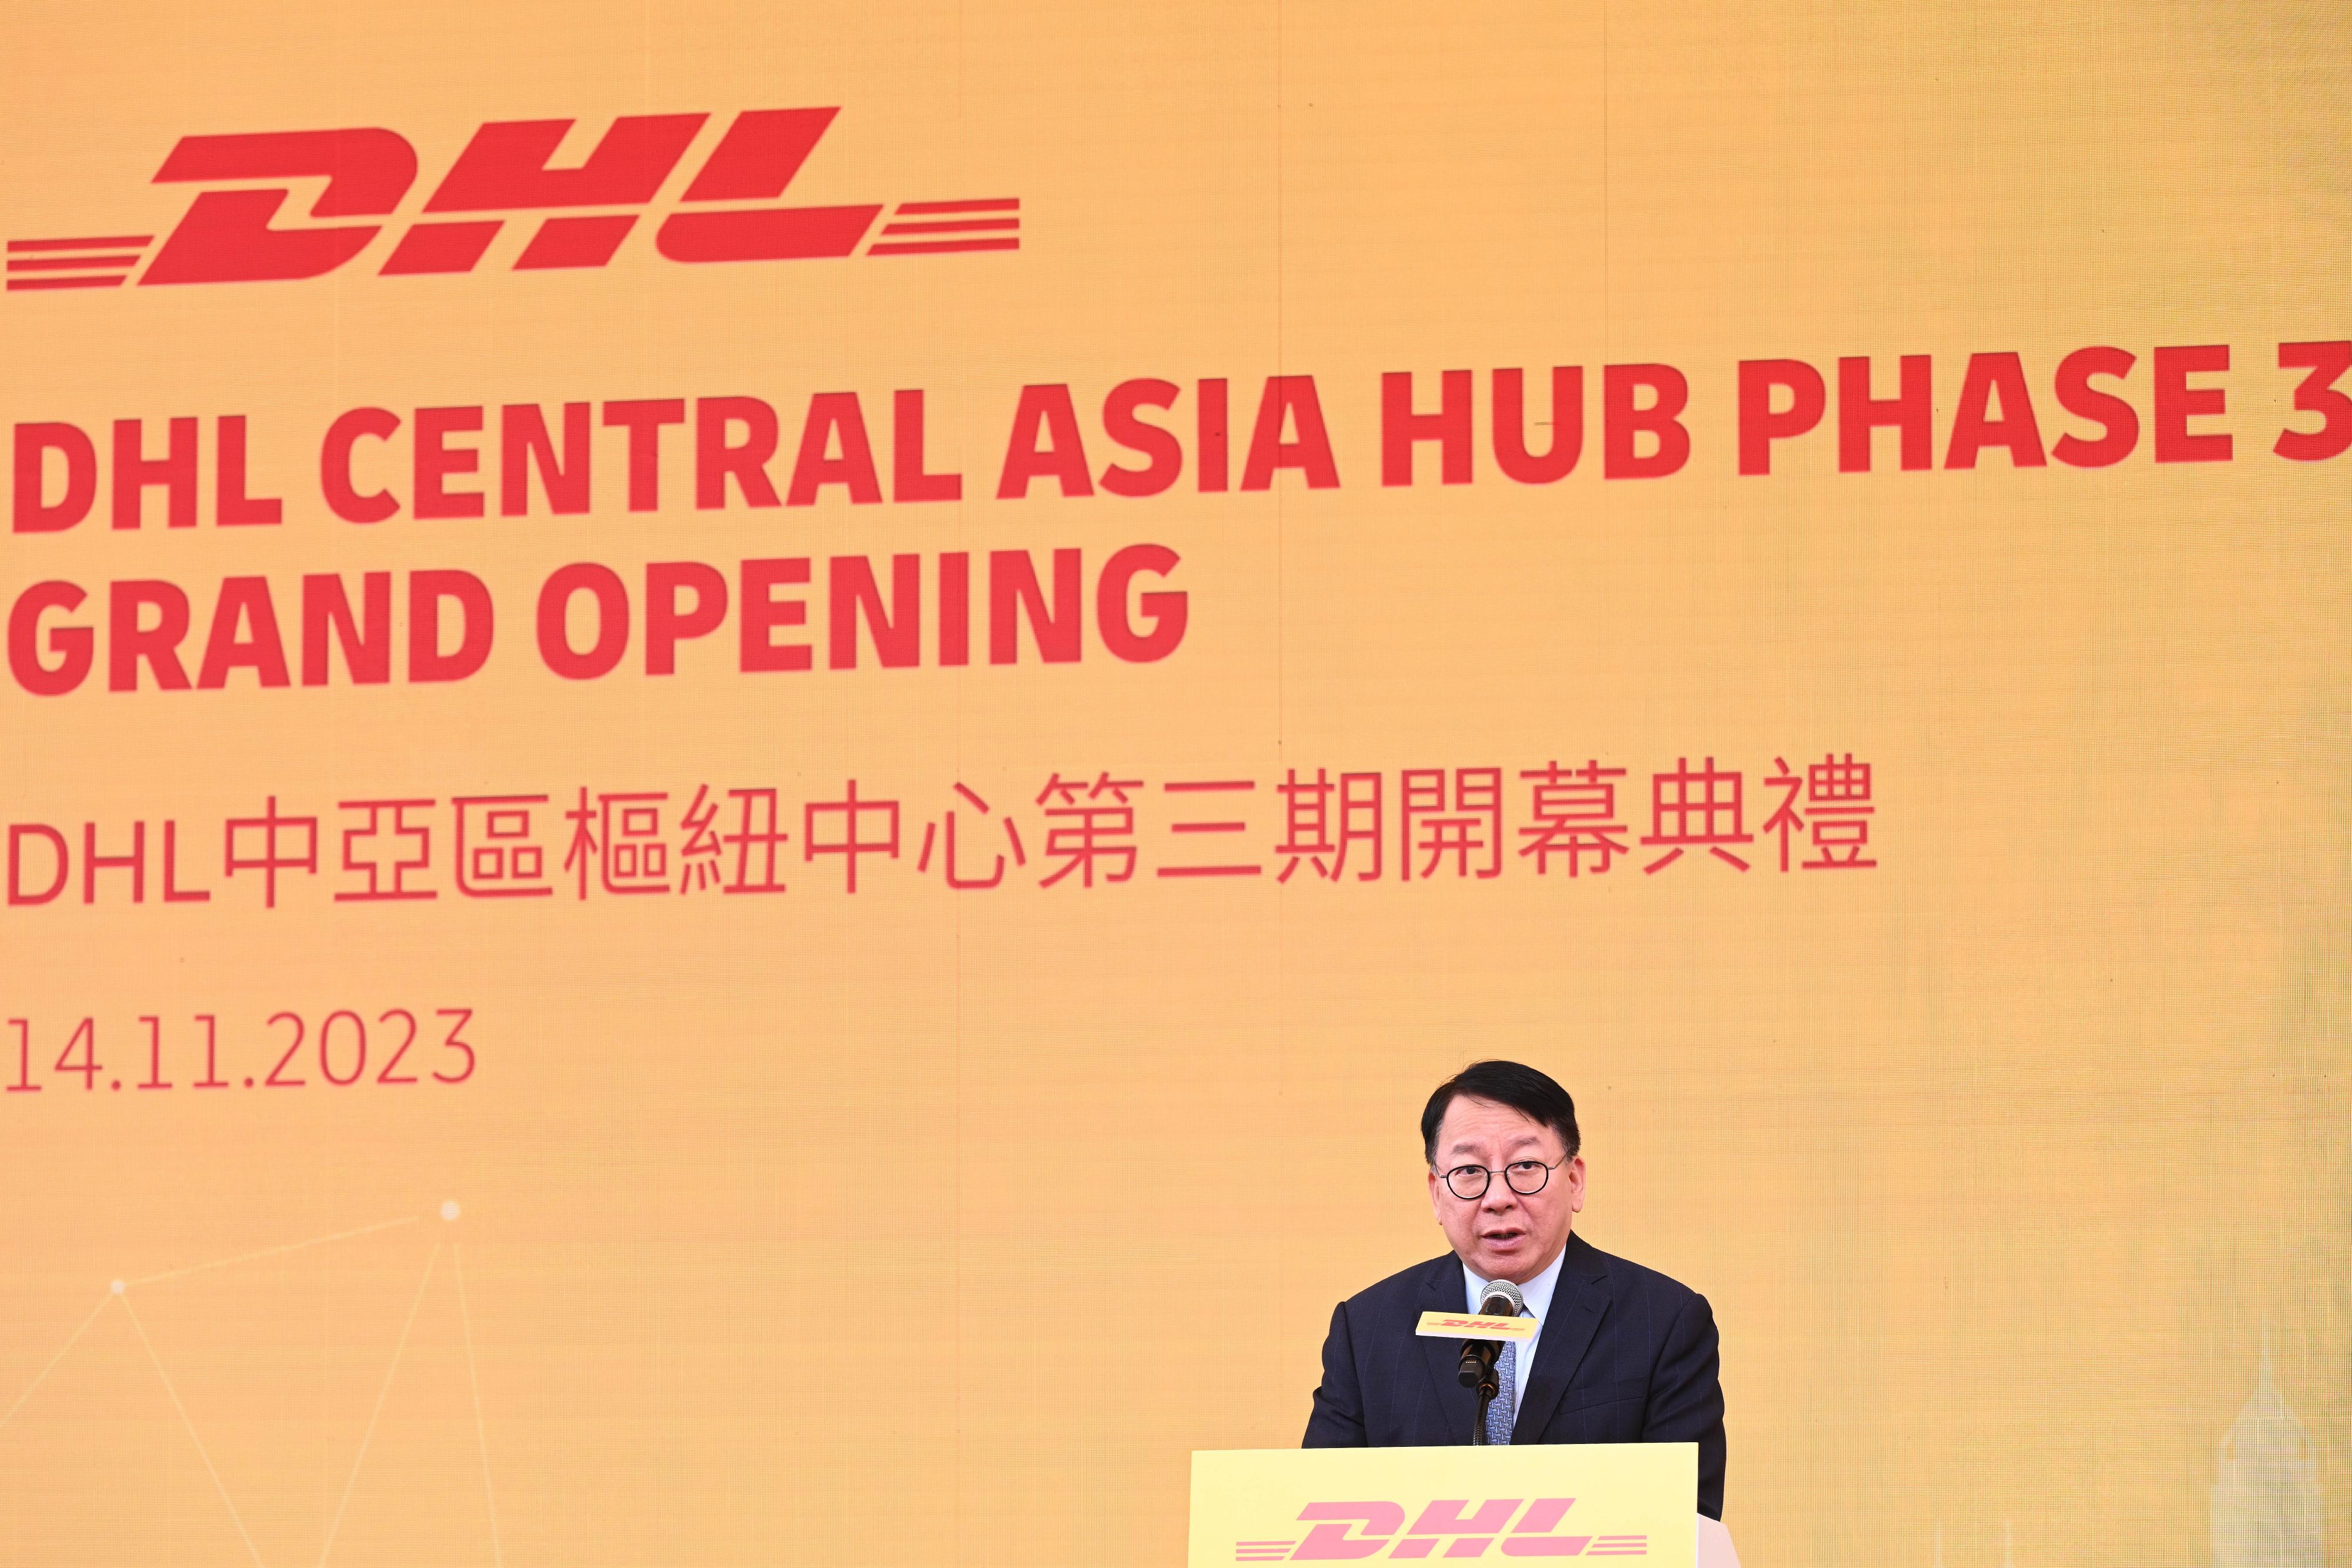 The Chief Secretary for Administration, Mr Chan Kwok-ki, speaks at the DHL Central Asia Hub Phase 3 Grand Opening today (November 14).